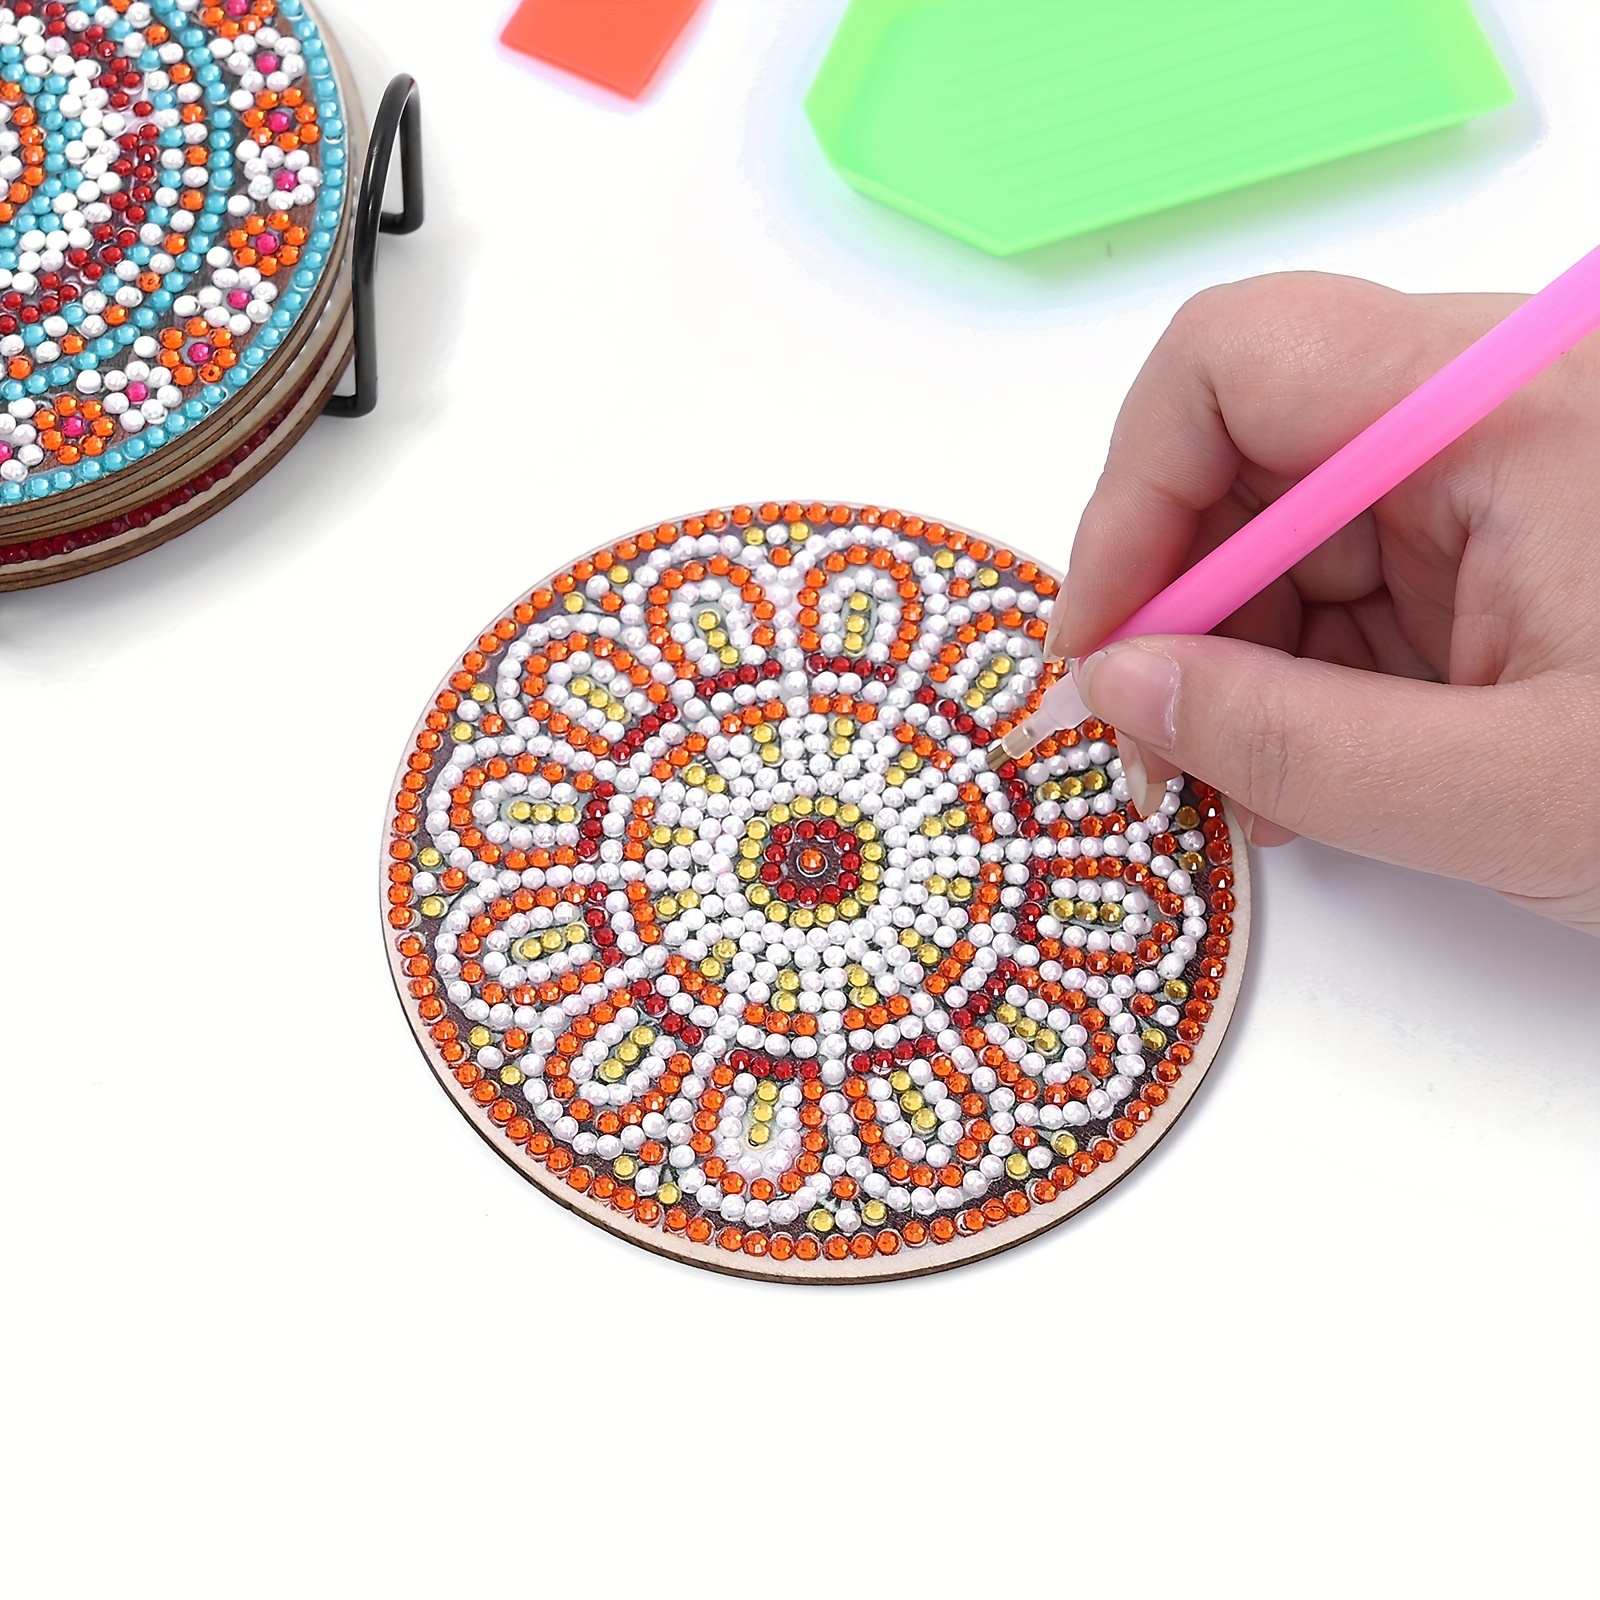  8 PCS Diamond Painting Coasters kit with Holder-Colorful Tree  Diamond dot Art Coasters for Adults Kids Beginners,DIY Art and Crafts Gift  : Electronics